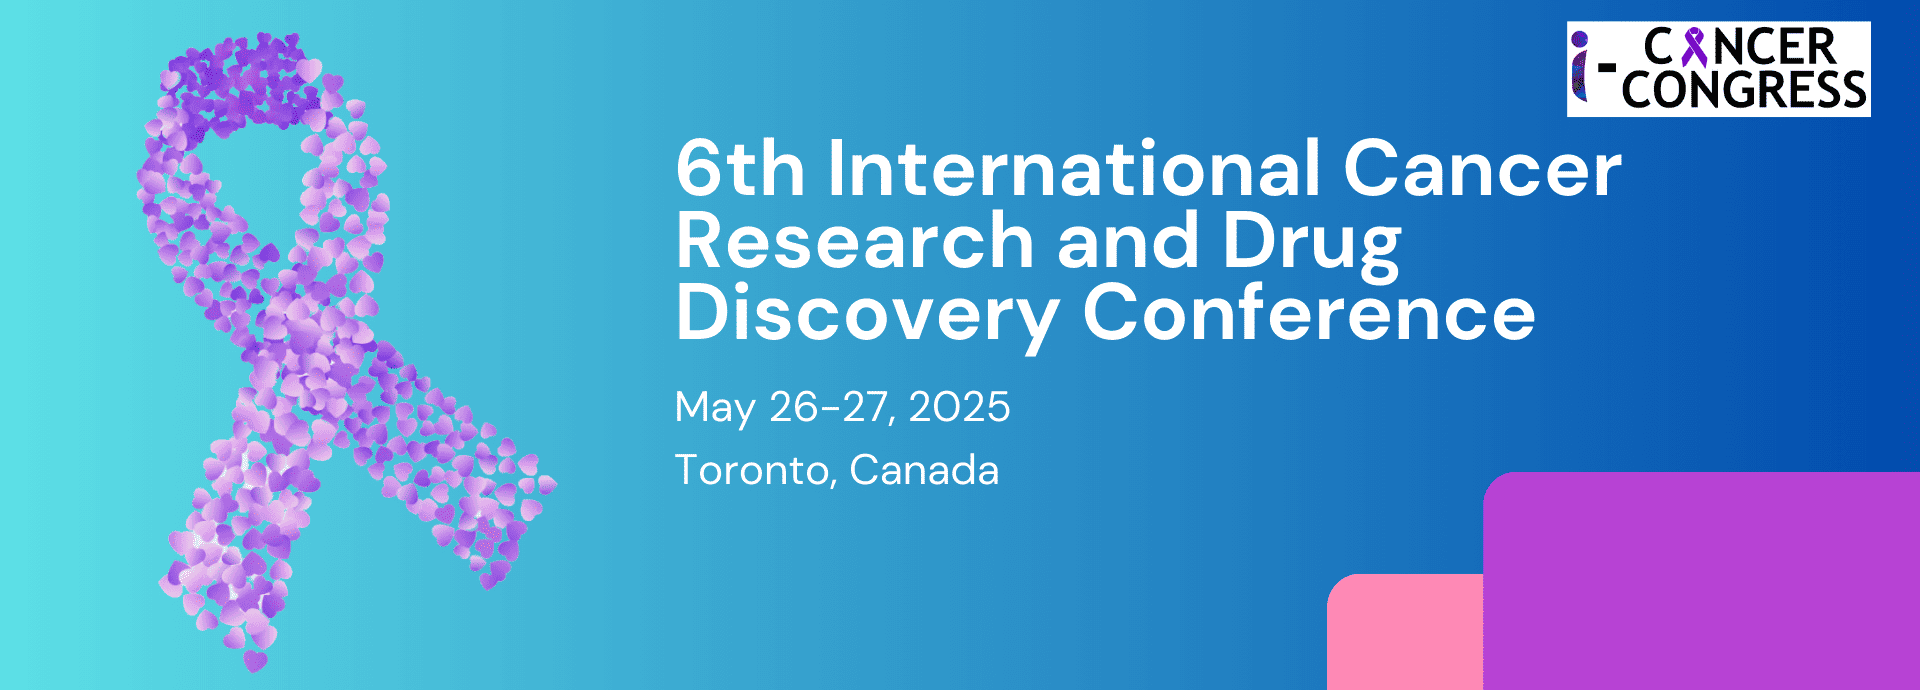 International Cancer Research and Drug Discovery Conference	